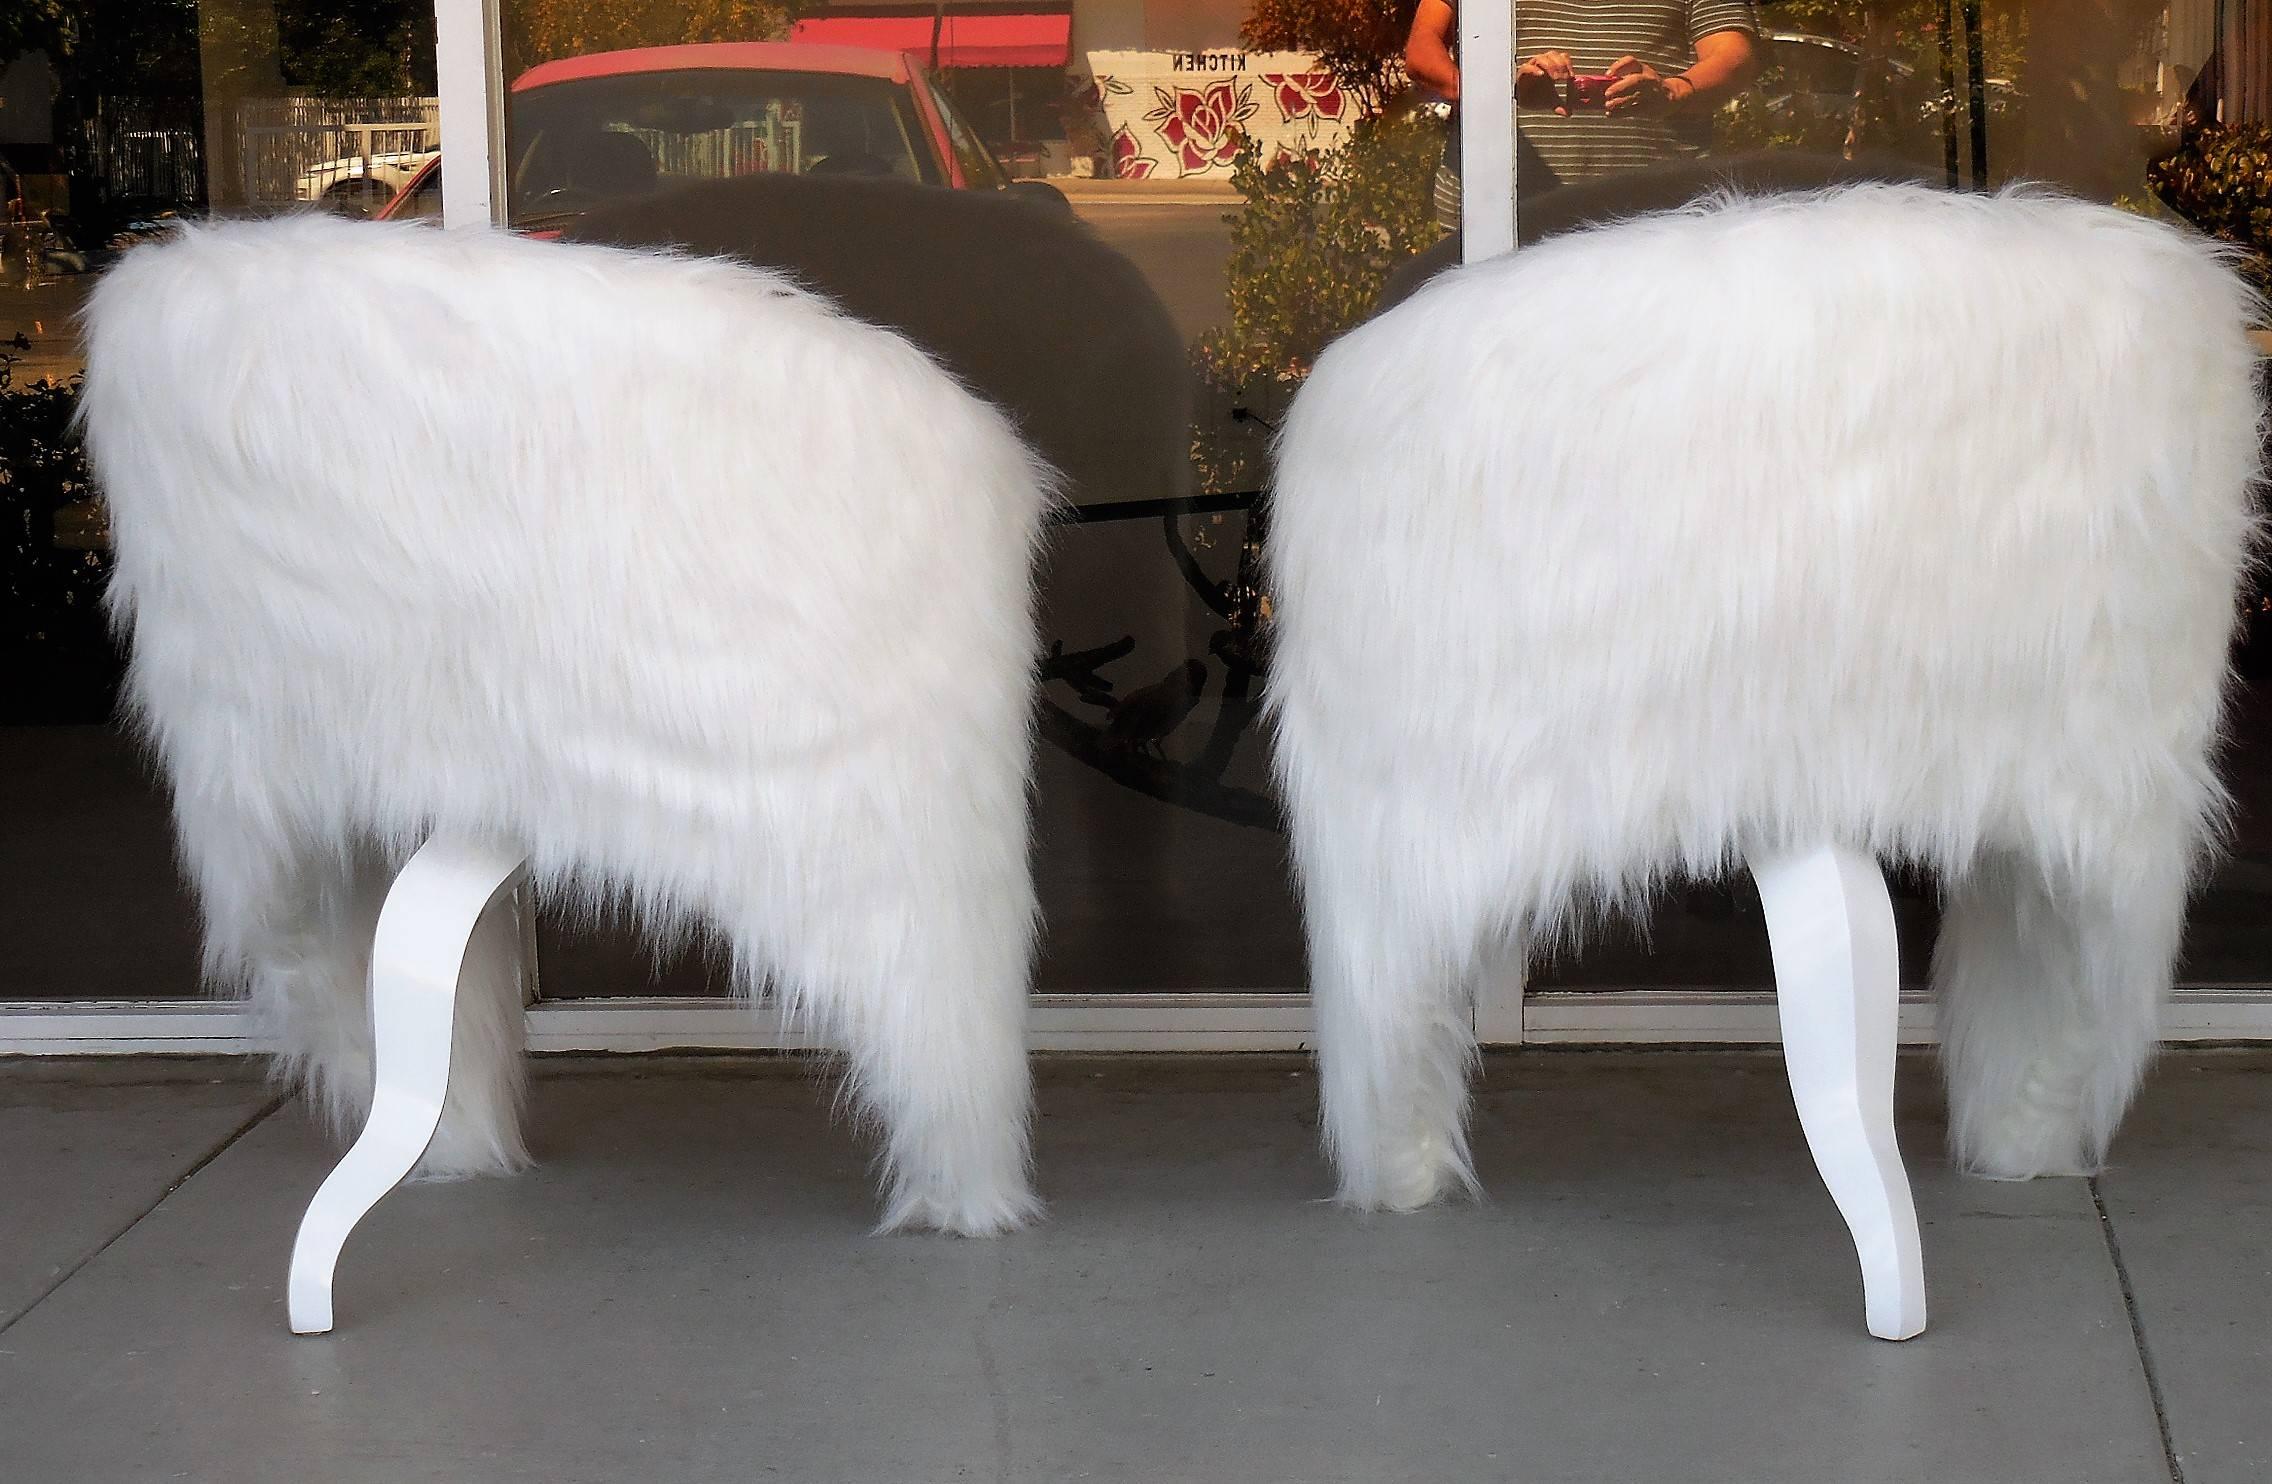 A pair of surreal lounge chairs. The back envelopes the seat and become the front legs. The shape is balanced by a wood tail like third leg.